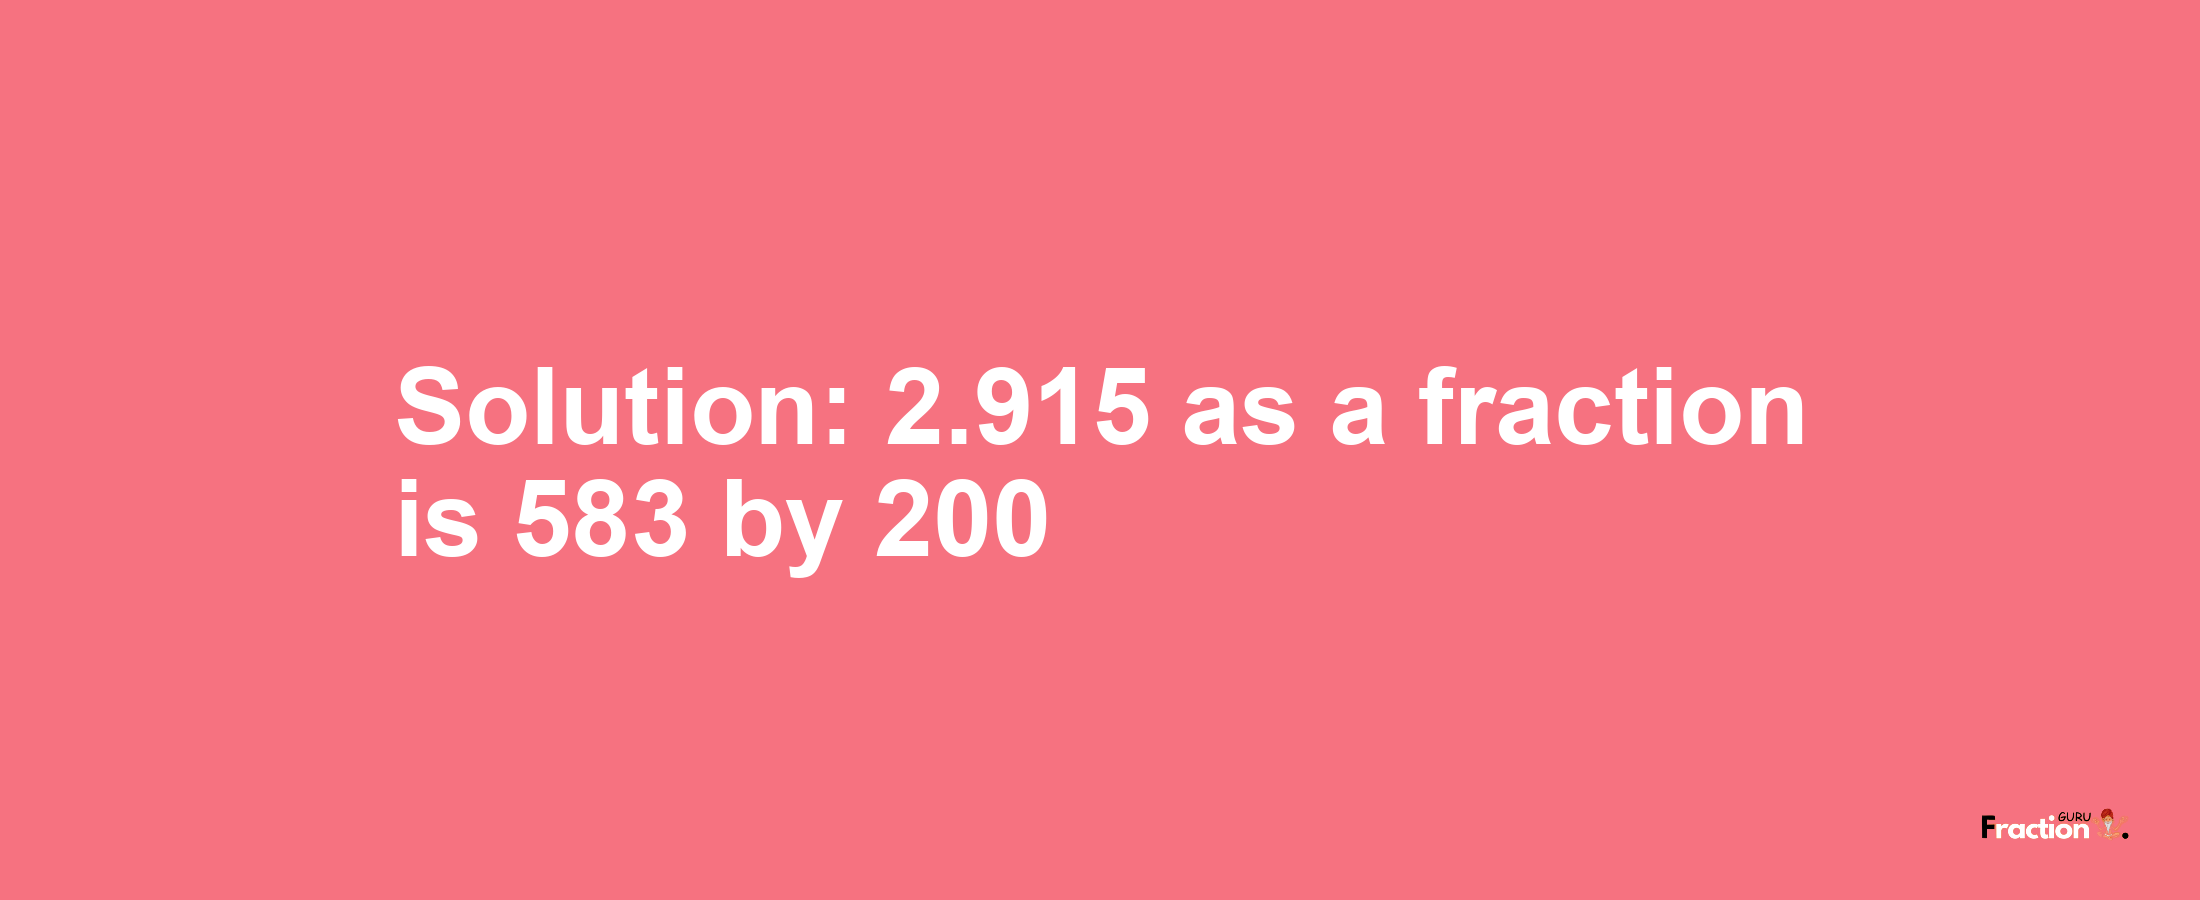 Solution:2.915 as a fraction is 583/200